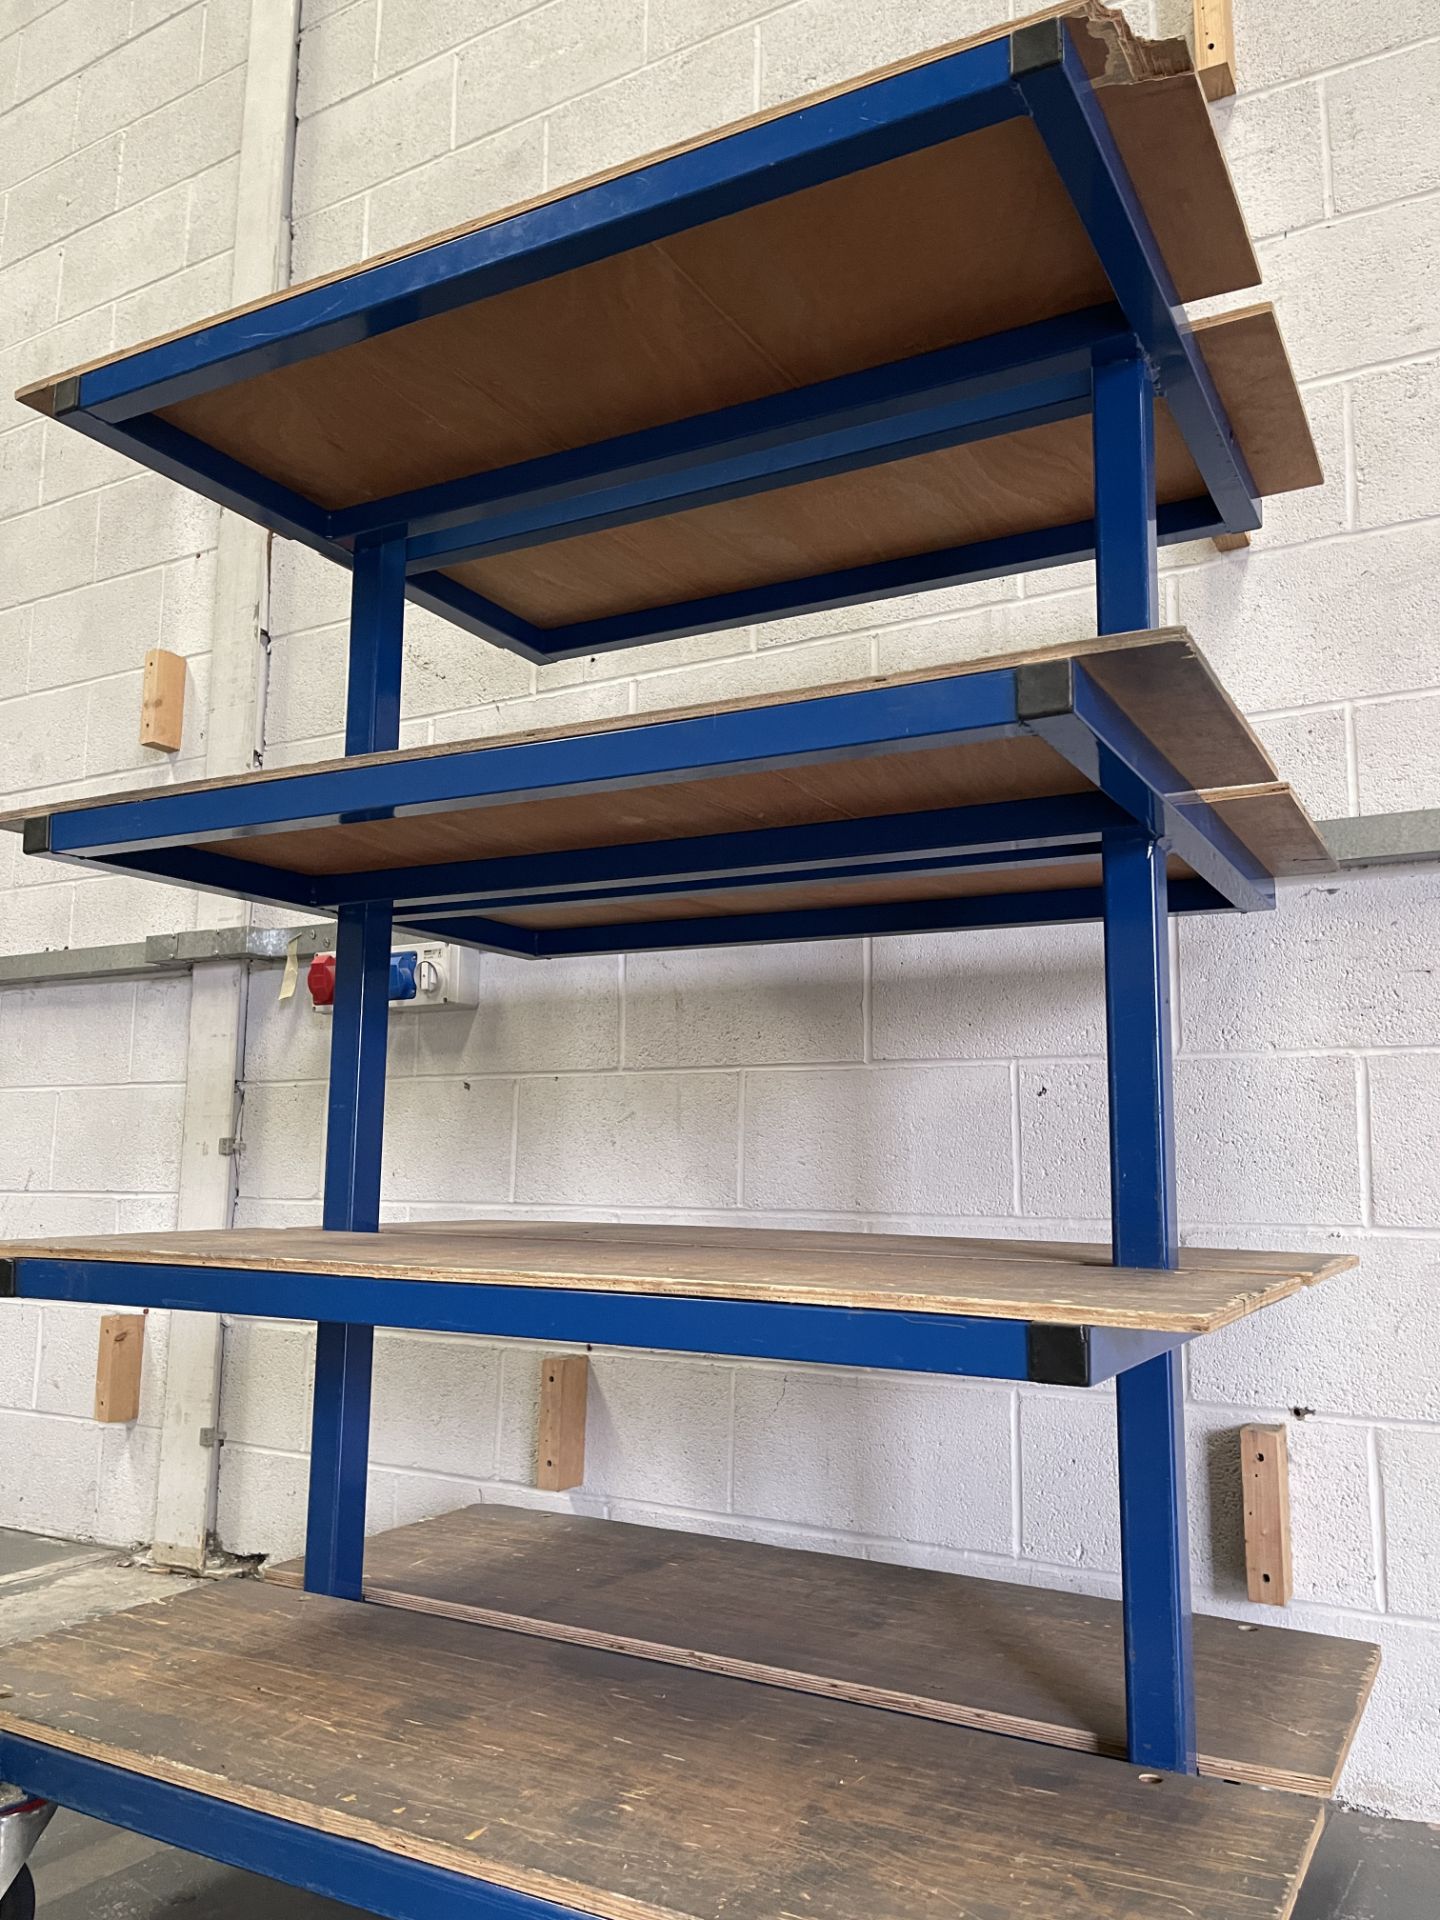 Heavy Duty Mobile Work Trolley. Steel Tube Construction With Wooden Shelving. - Image 5 of 7